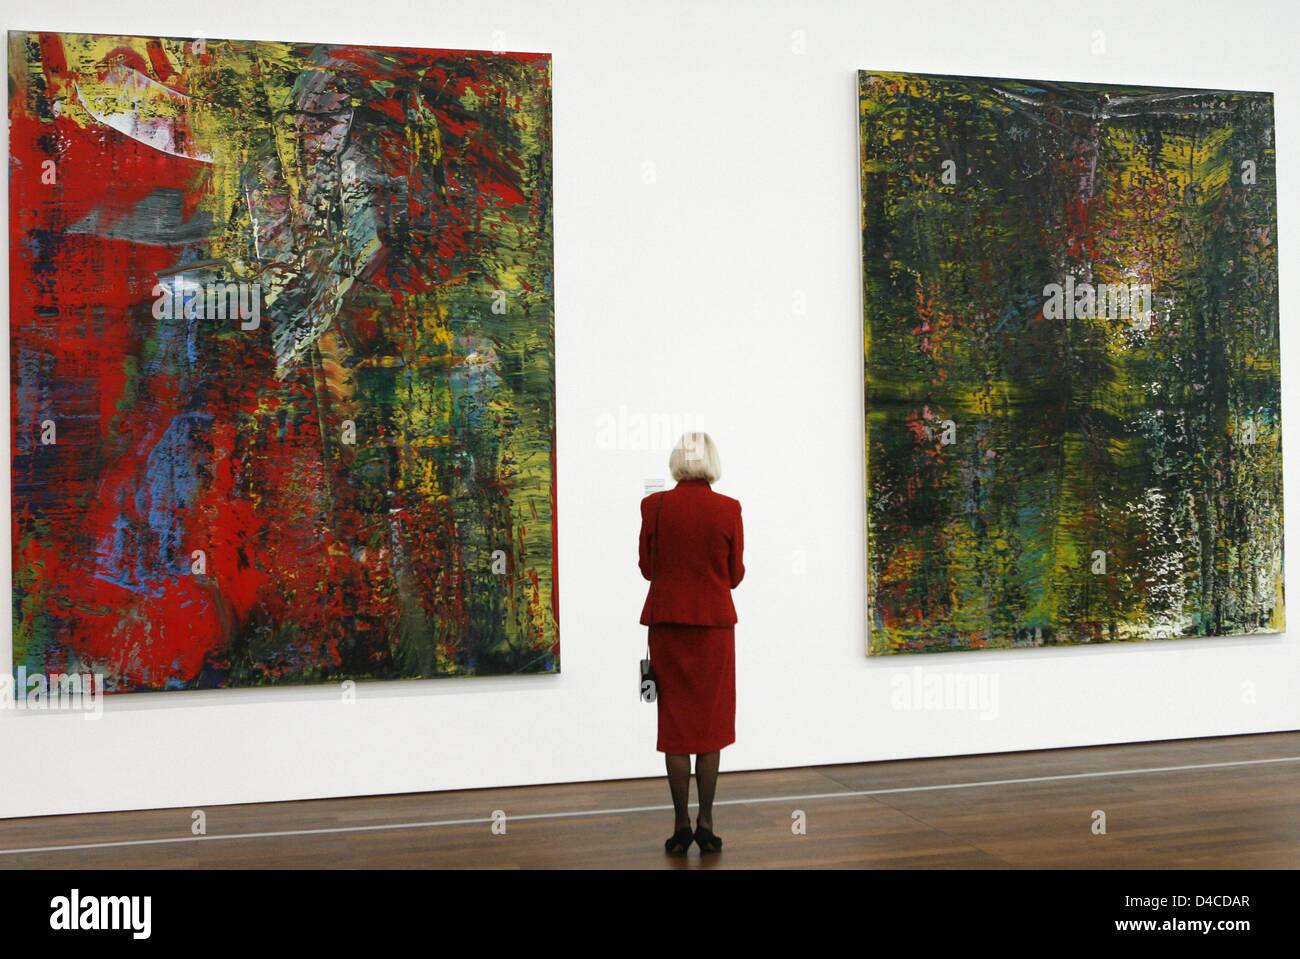 A visitor looks at the paitings 'Abstraktes Bild, Courbet' ('Abstract Painting, Courbet') (L) and 'Schraege' ('Slant') (1988,R) by German artist Gerhard Richter at the 'Museum Frieder Burda' in Baden-Baden, Germany, 18 January 2008. The museum presents more than 60 artworks by Gerhard Richter, which the artist created between 1963 and 2007. The exhibtion 'Gerhard Richter. Bilder au Stock Photo